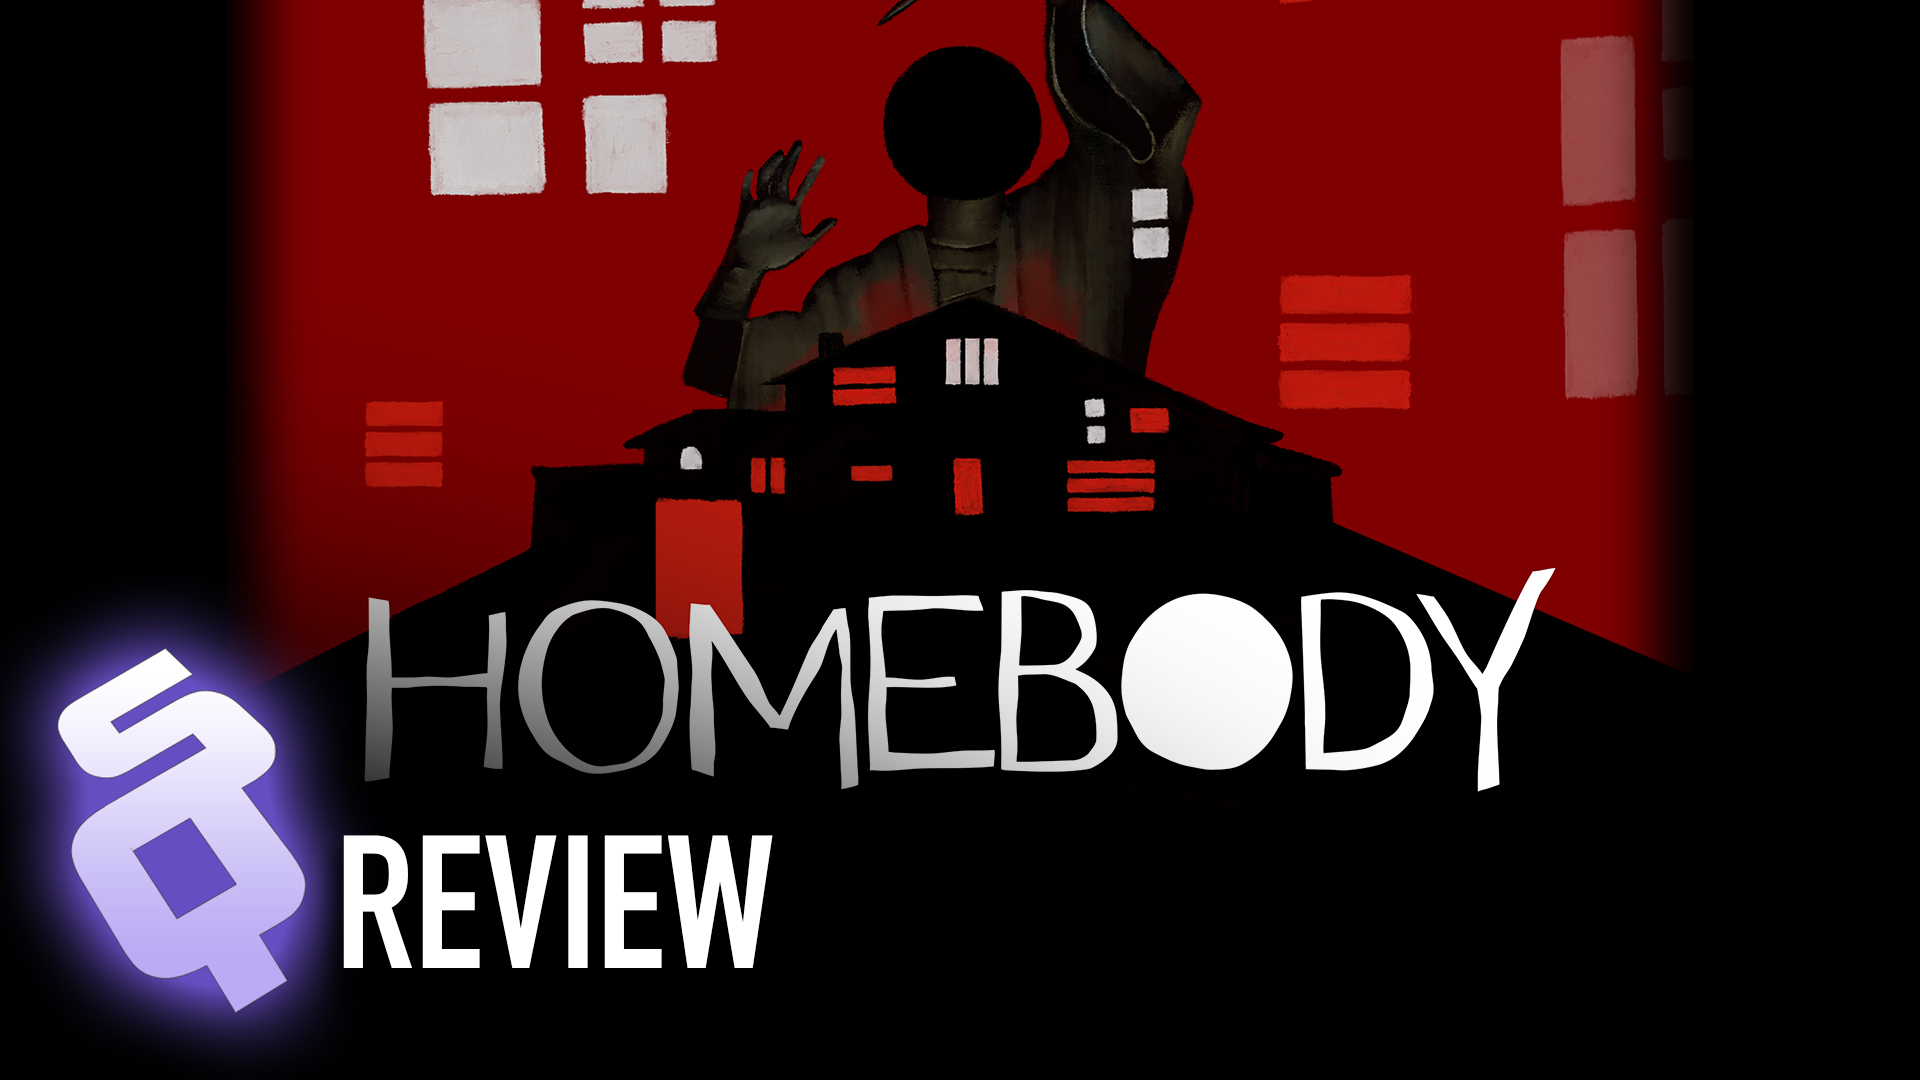 Homebody review